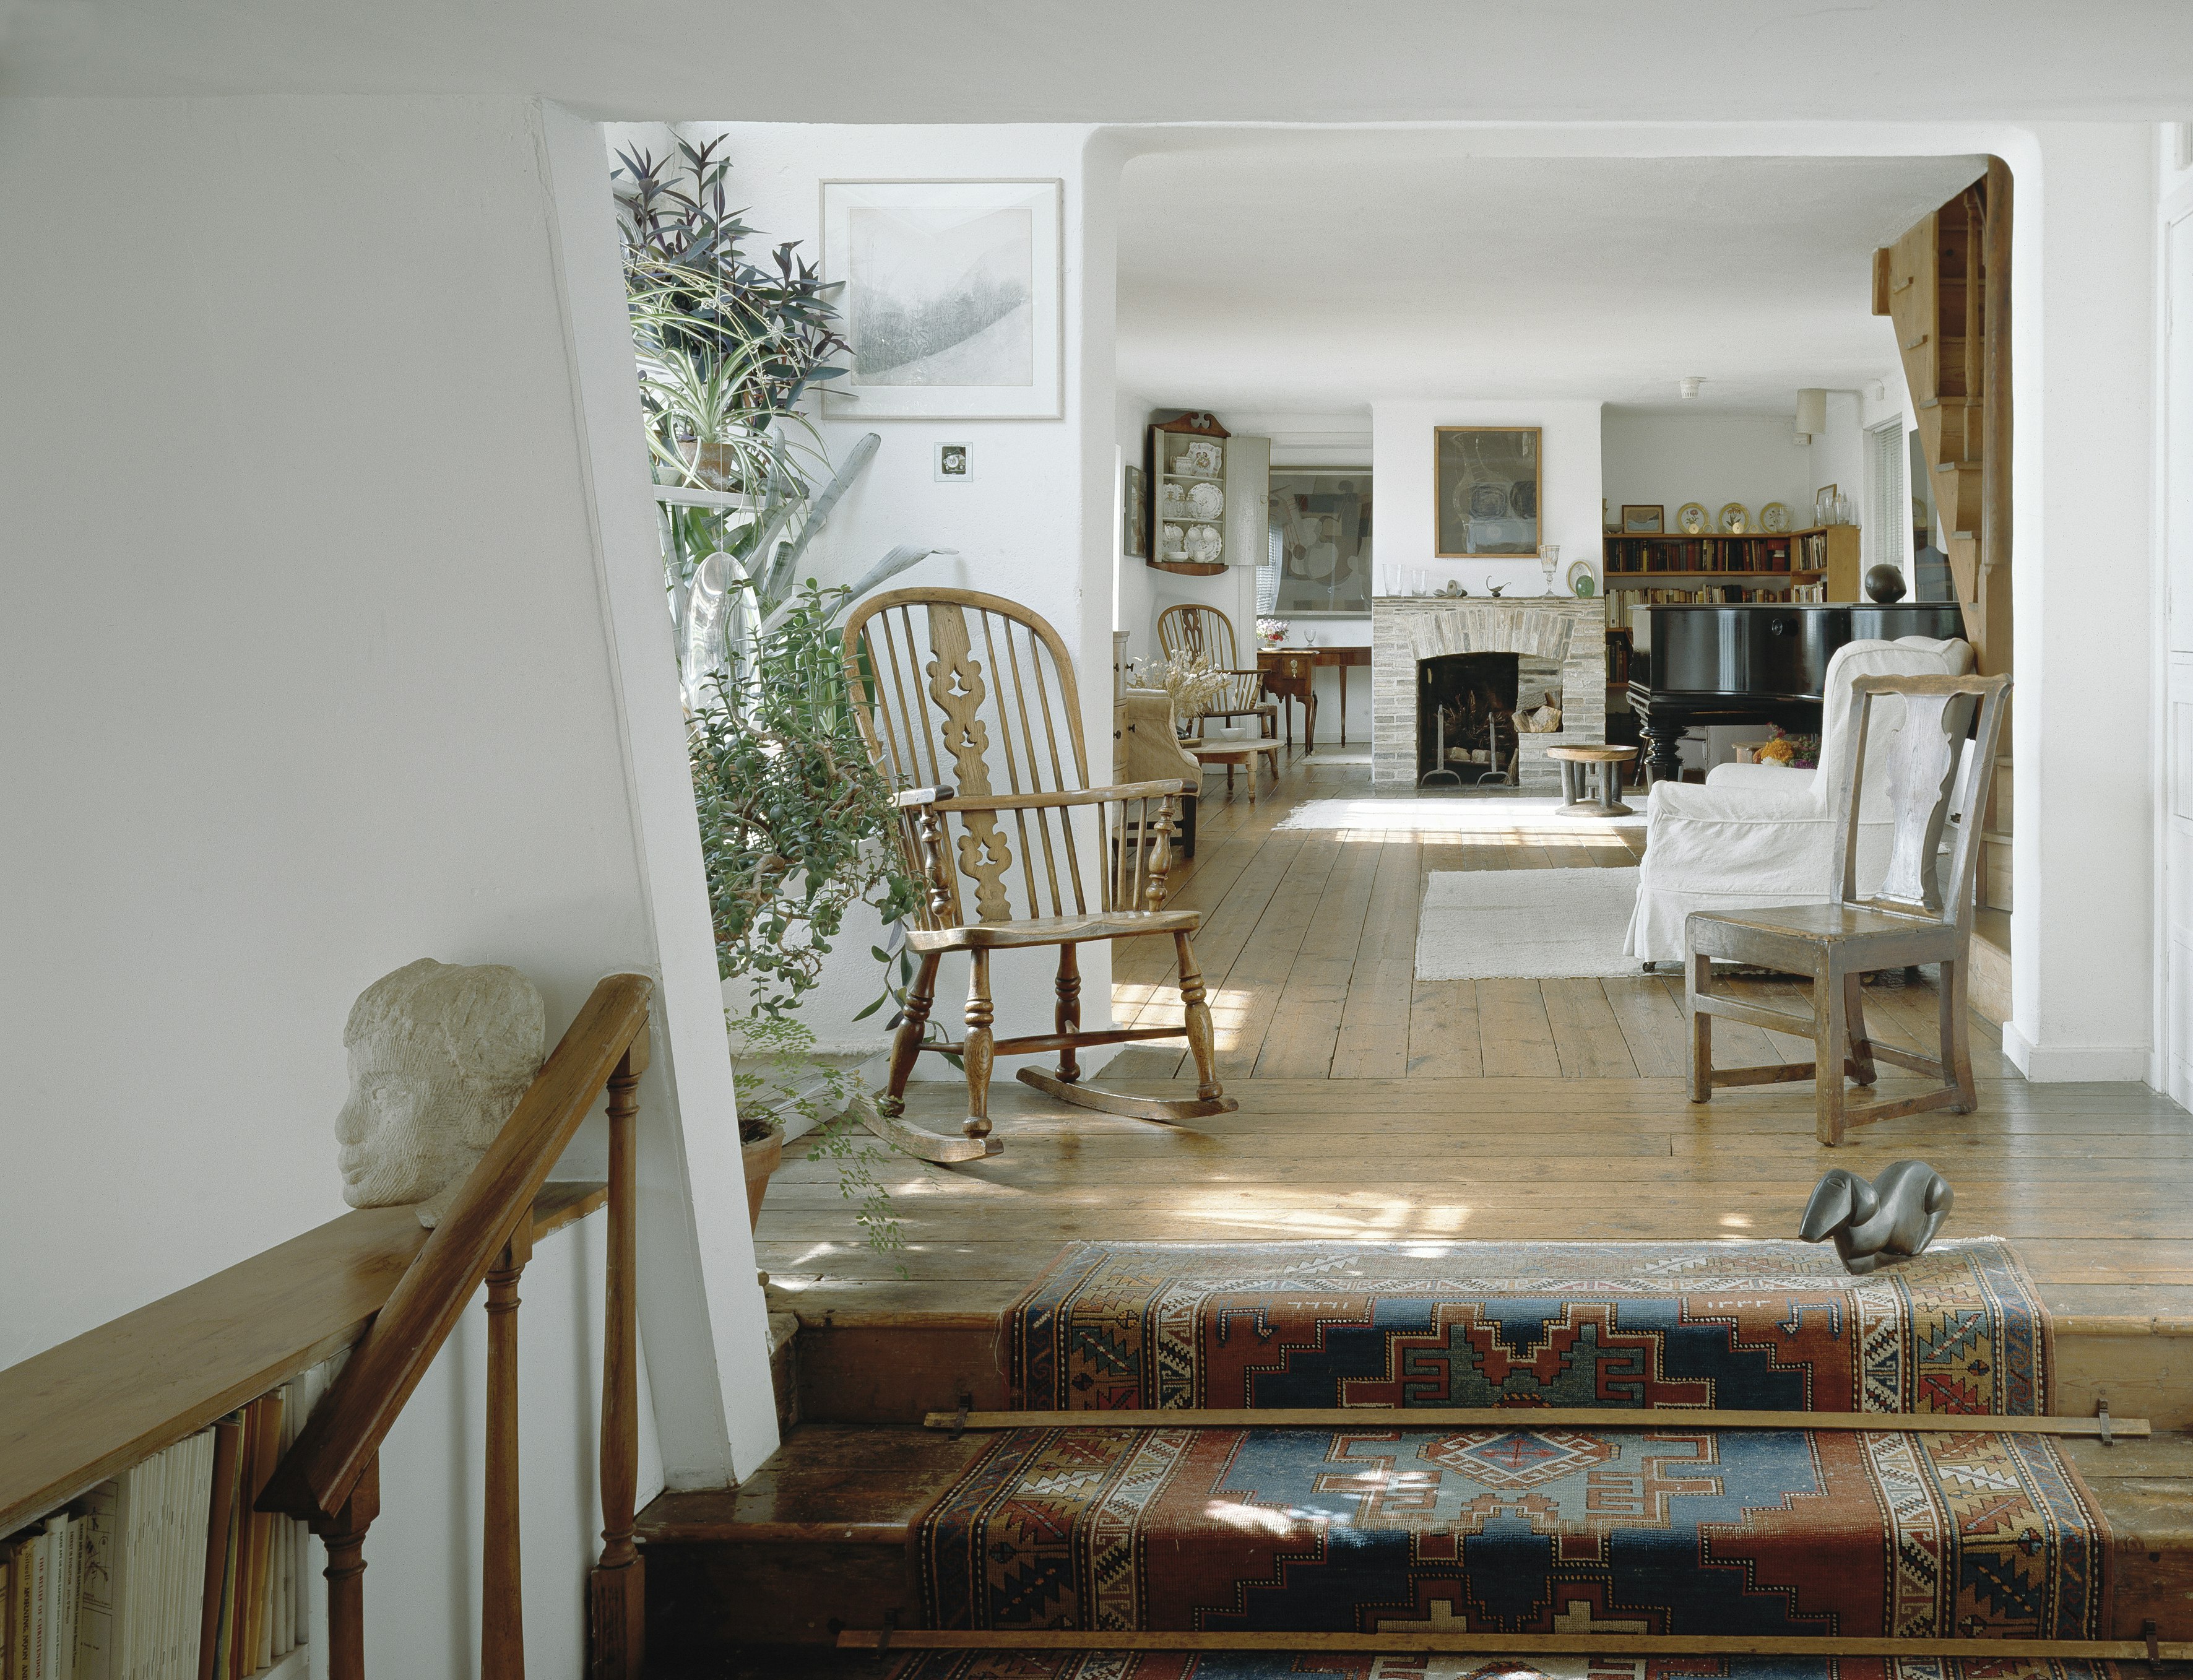 An interior shot of Kettle's Yard, Cambridge. Stairs lead up to a white-walled room furnished like a regular house, but the walls are lined with works from Jim Ede's collection.